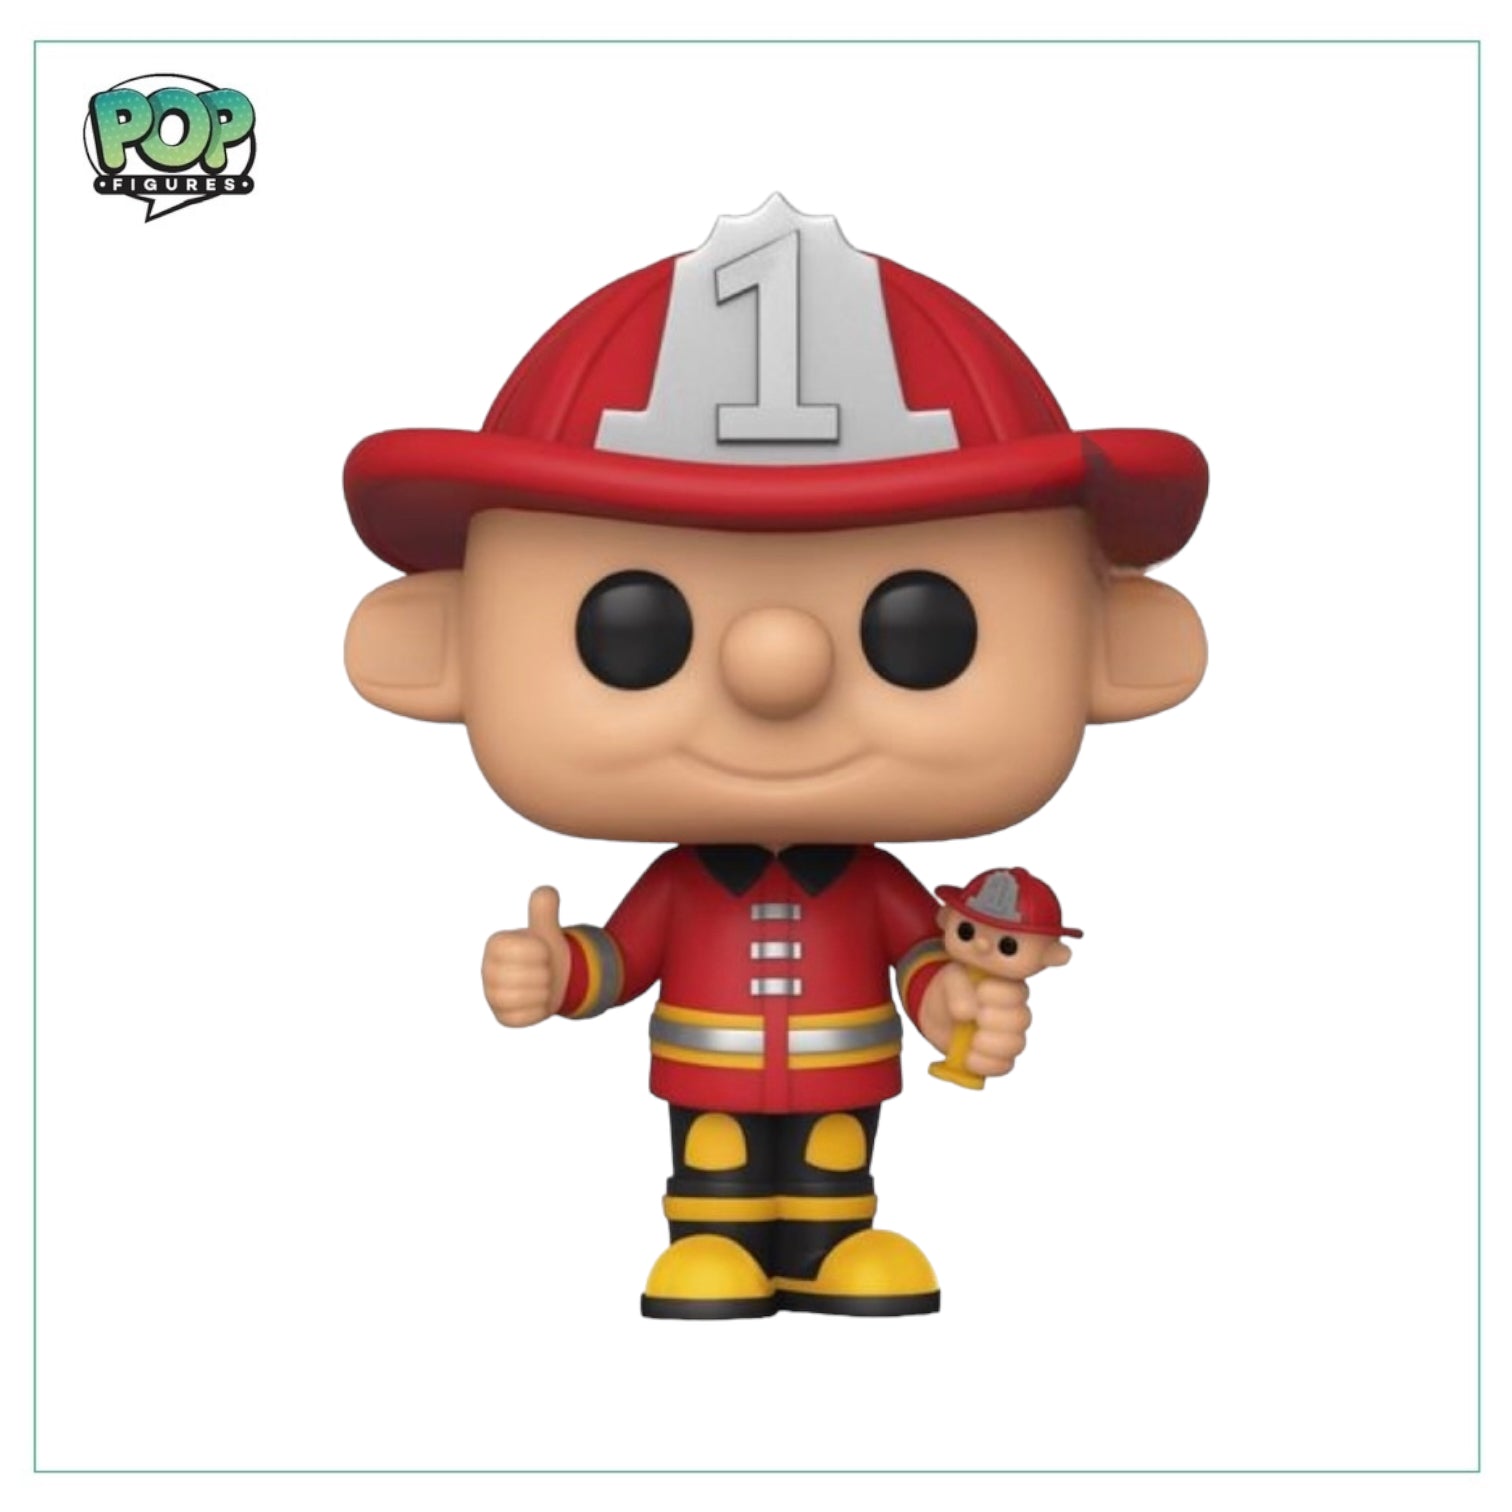 Pez Boy (Fireman) #91 Funko Pop! - Ad Icons-  2020 ECCC Shared Convention